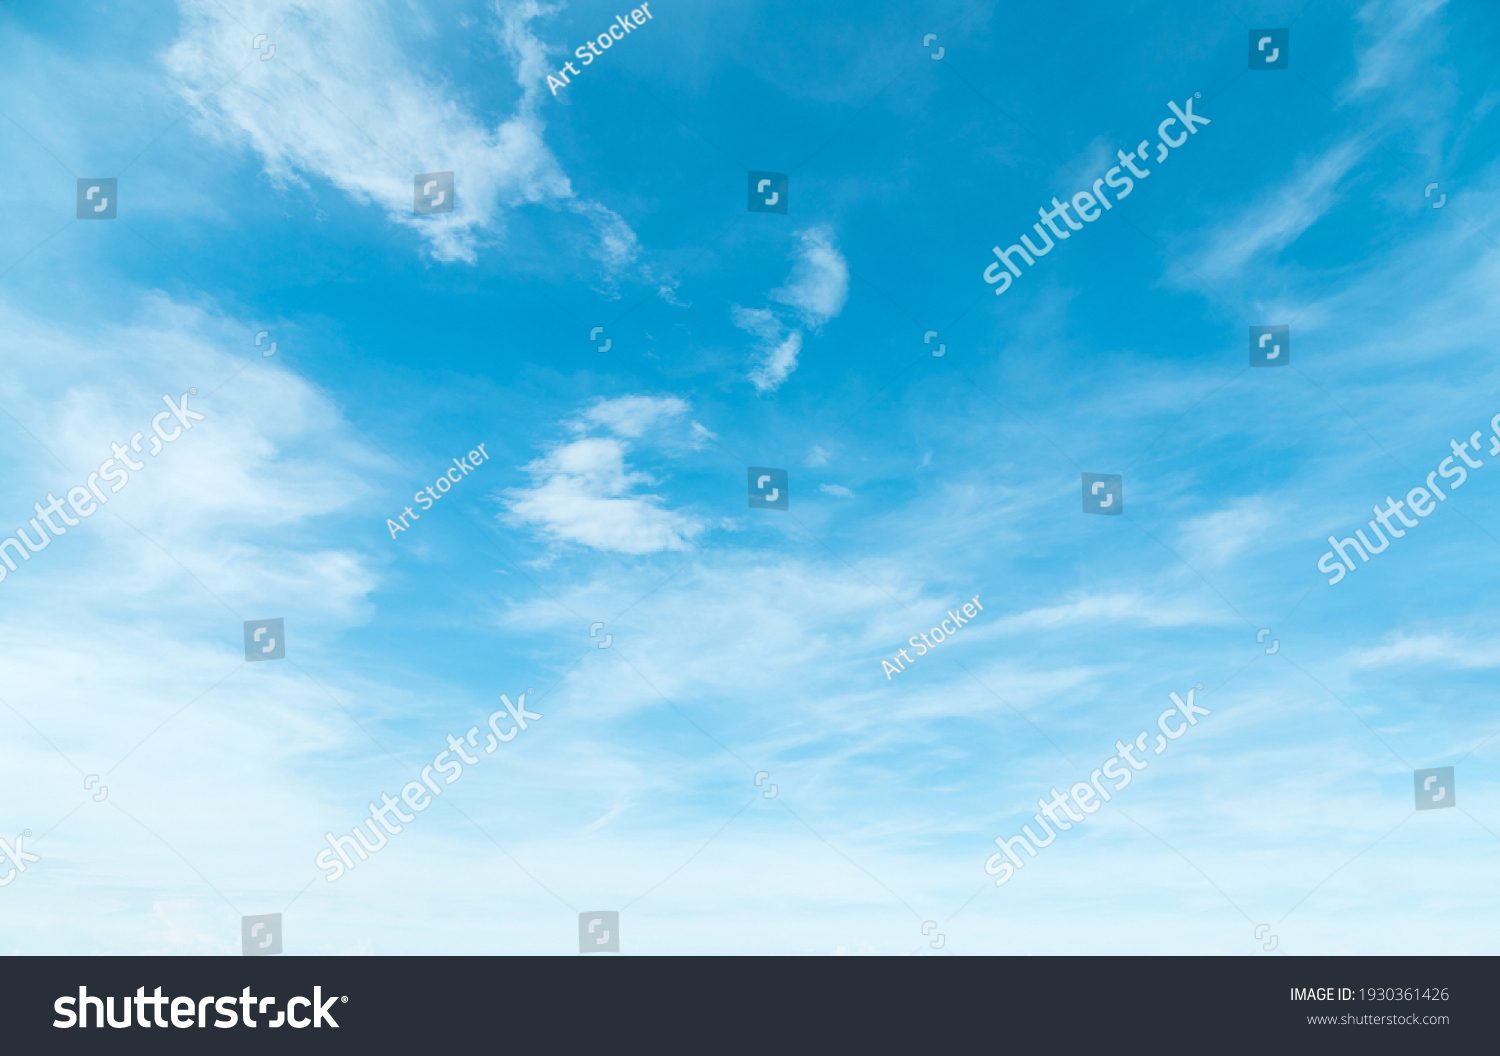 Summer blue sky and white clouds background. Beautiful clear cloudy in calm sunlight spring season. Cirrus vivid teal cyan cloudscape in environment. Outdoors horizon skyline fall spring sunshine day. #1930361426